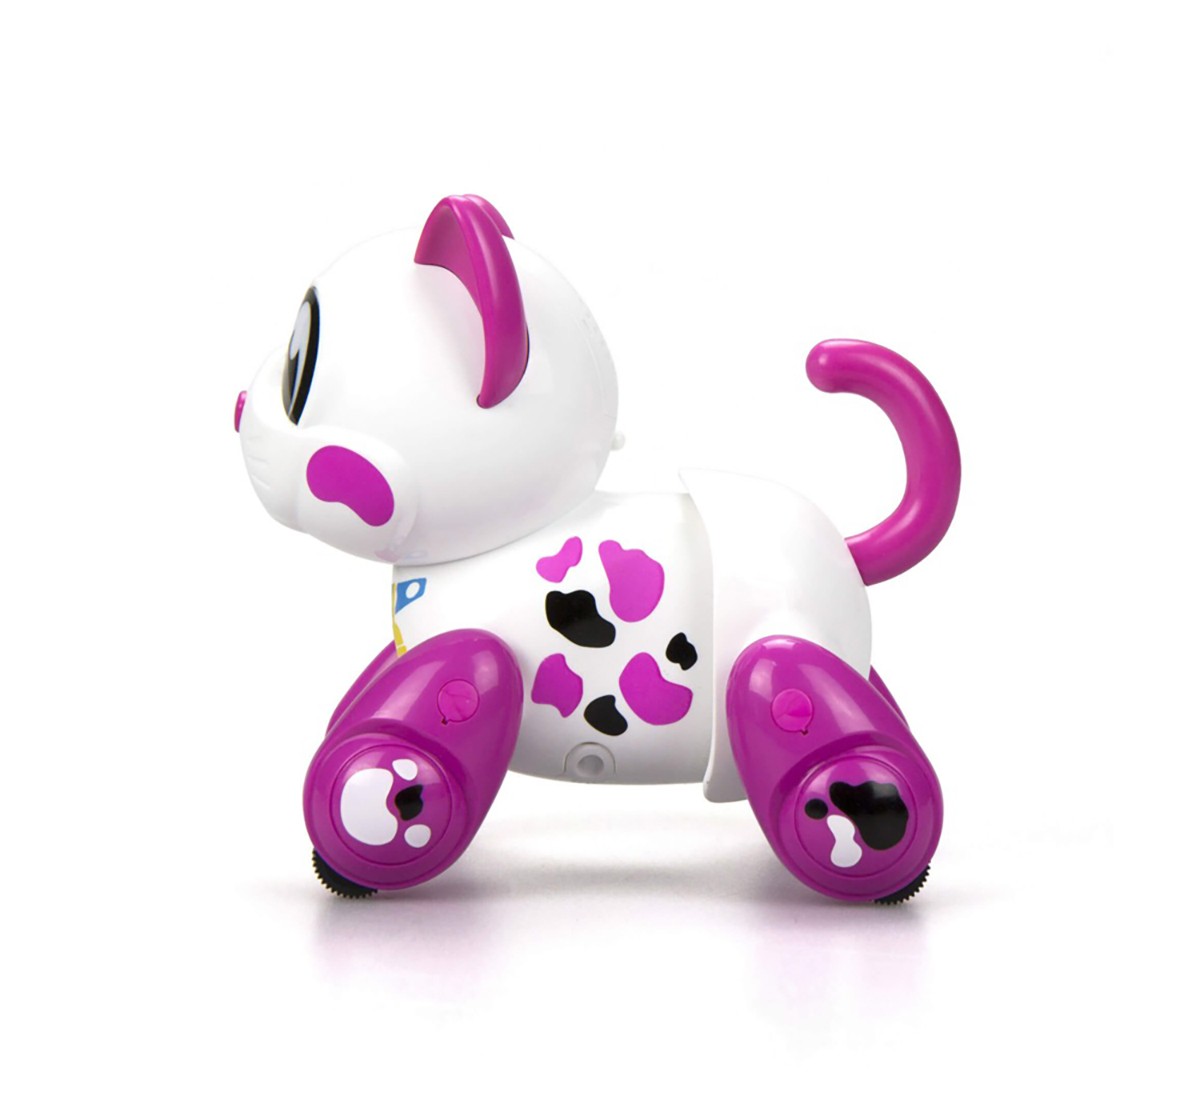 Silverlit Ycoo Mooko White And Pink Remote Control Toys for Kids age 3Y+ 